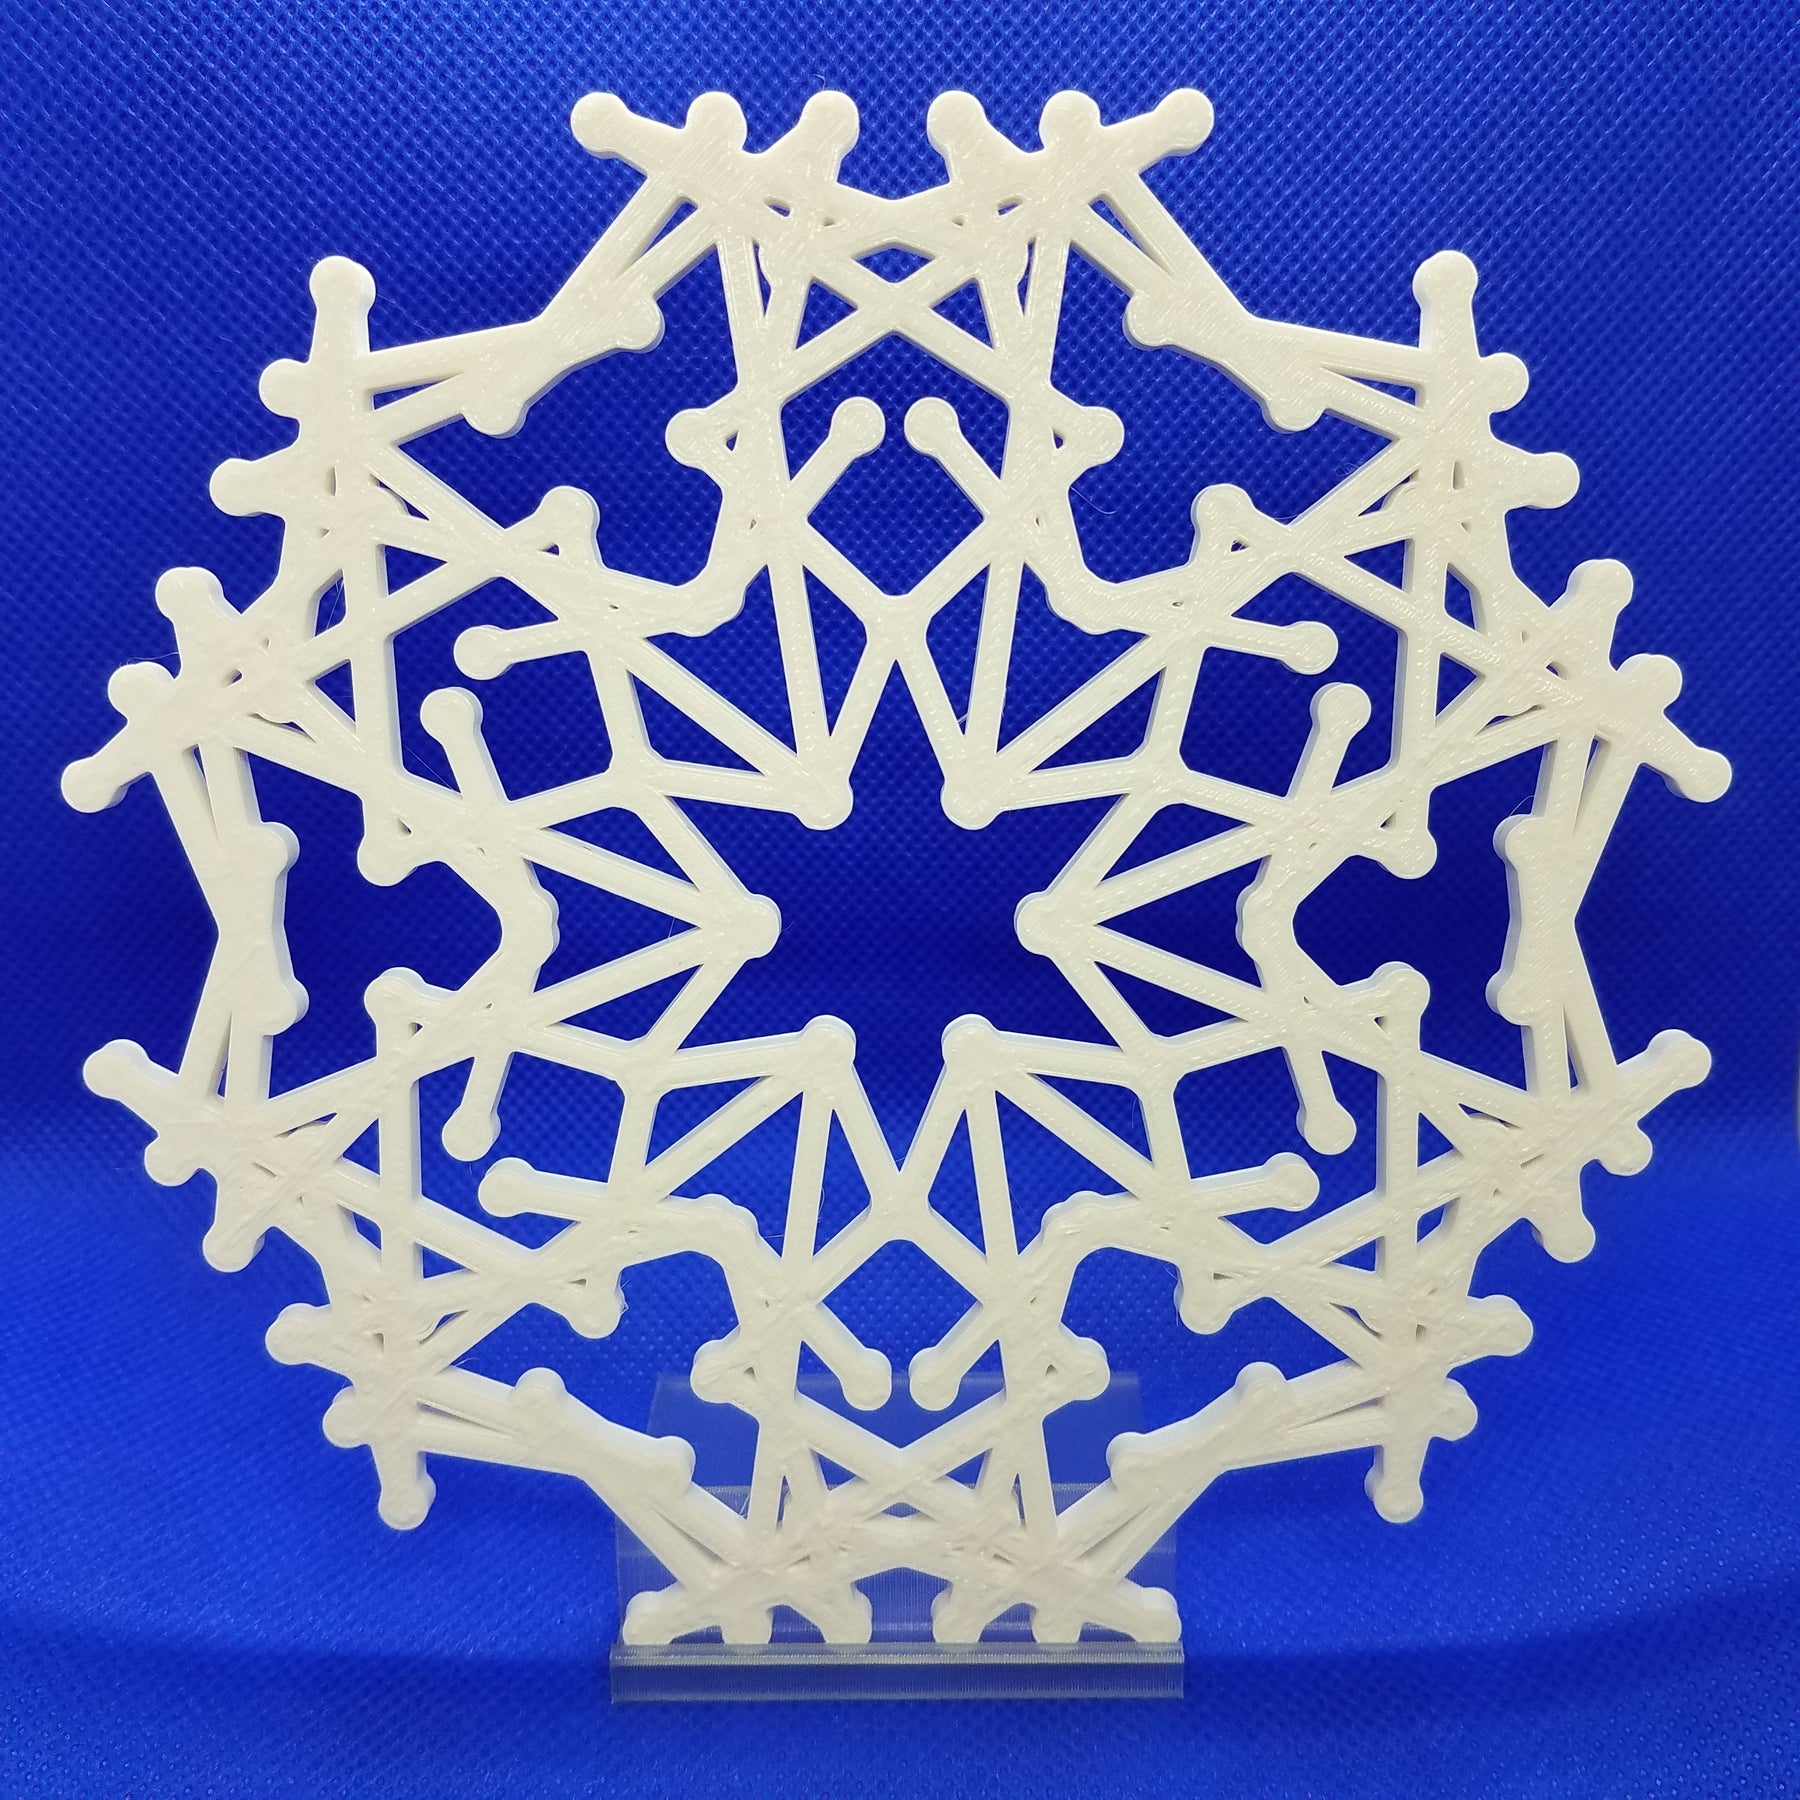 Large Snowflakes With Stands